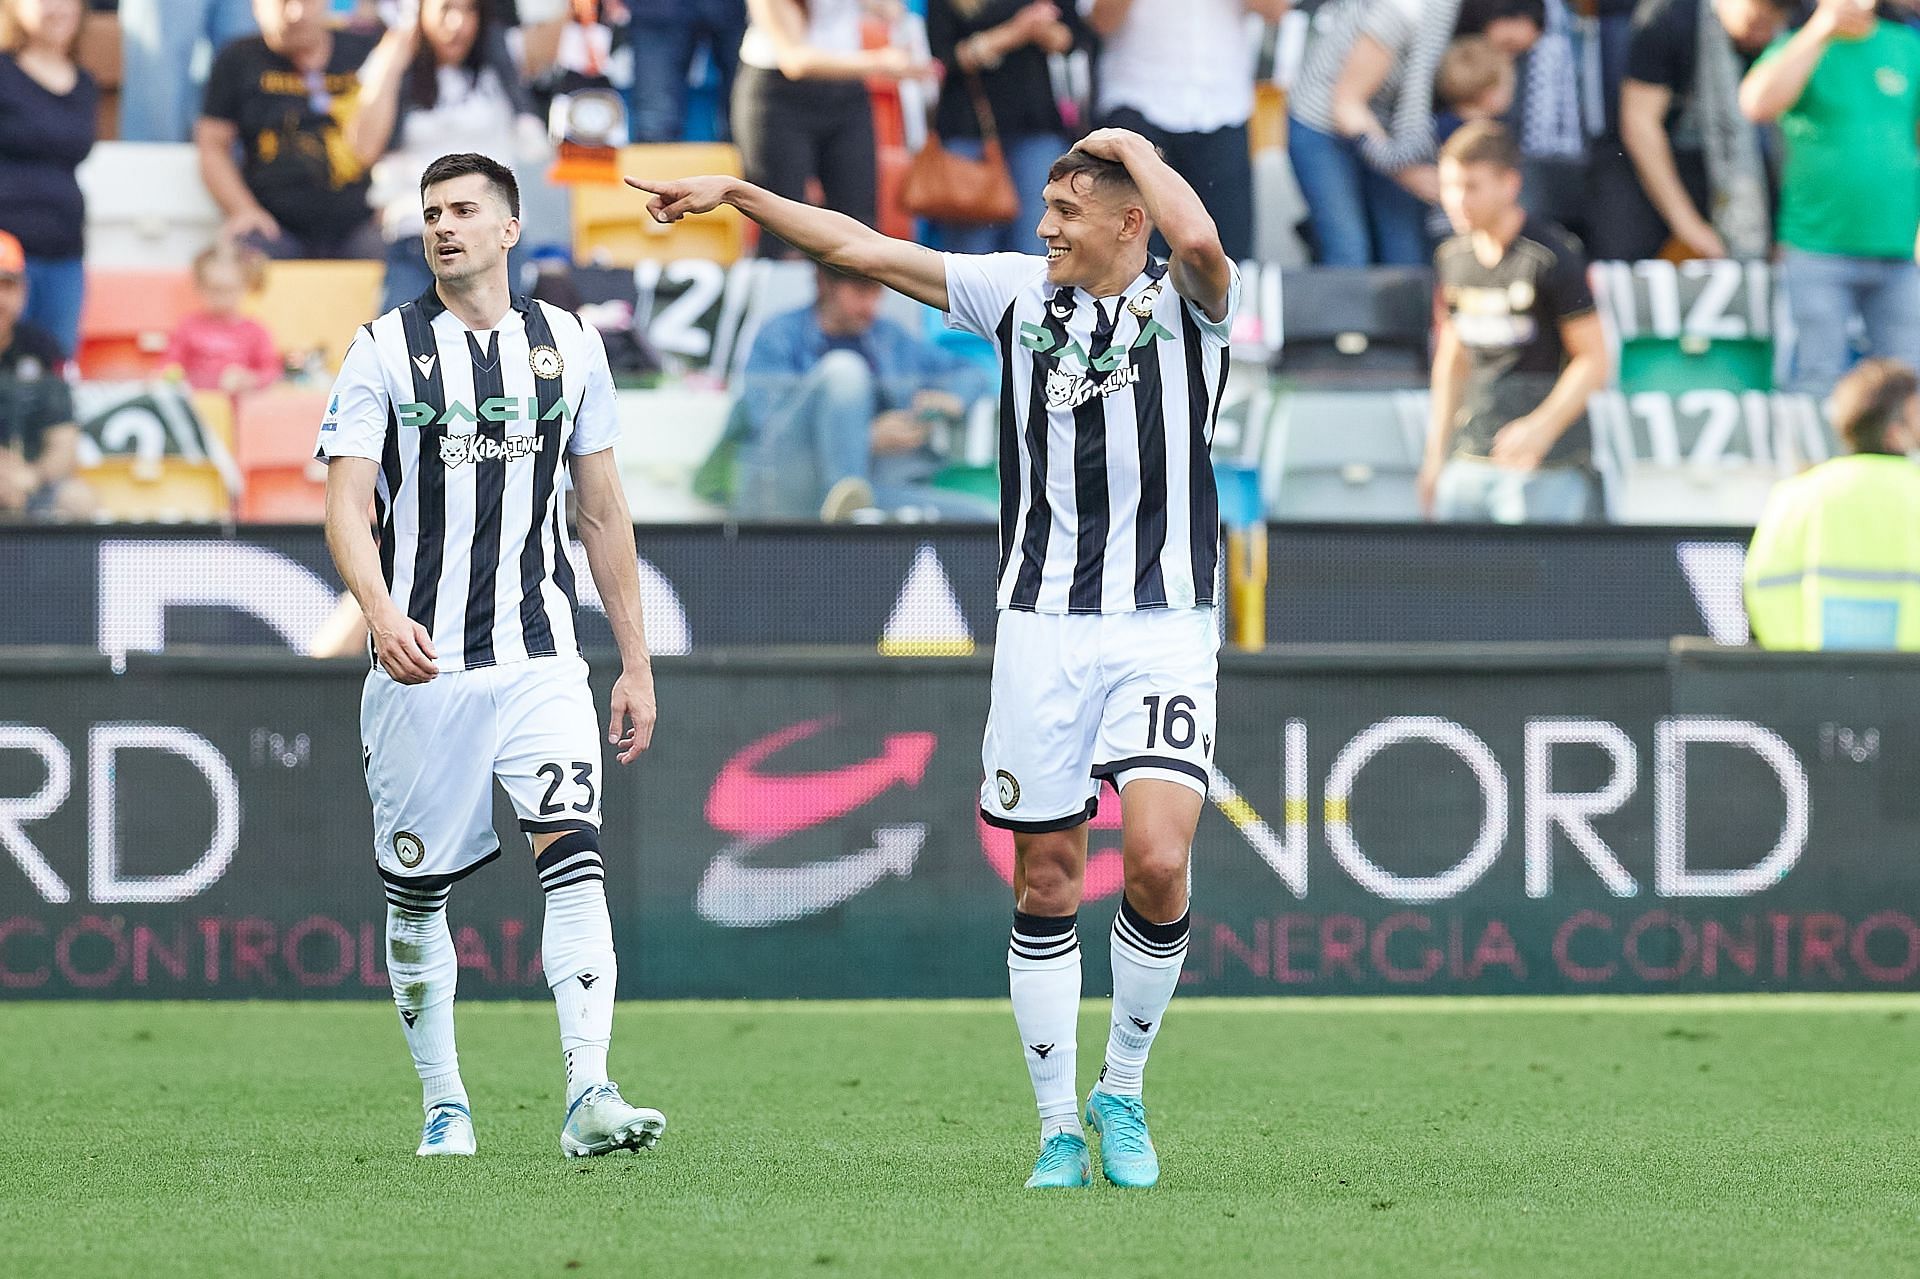 Udinese face Berlin in a pre-season friendly on Saturday